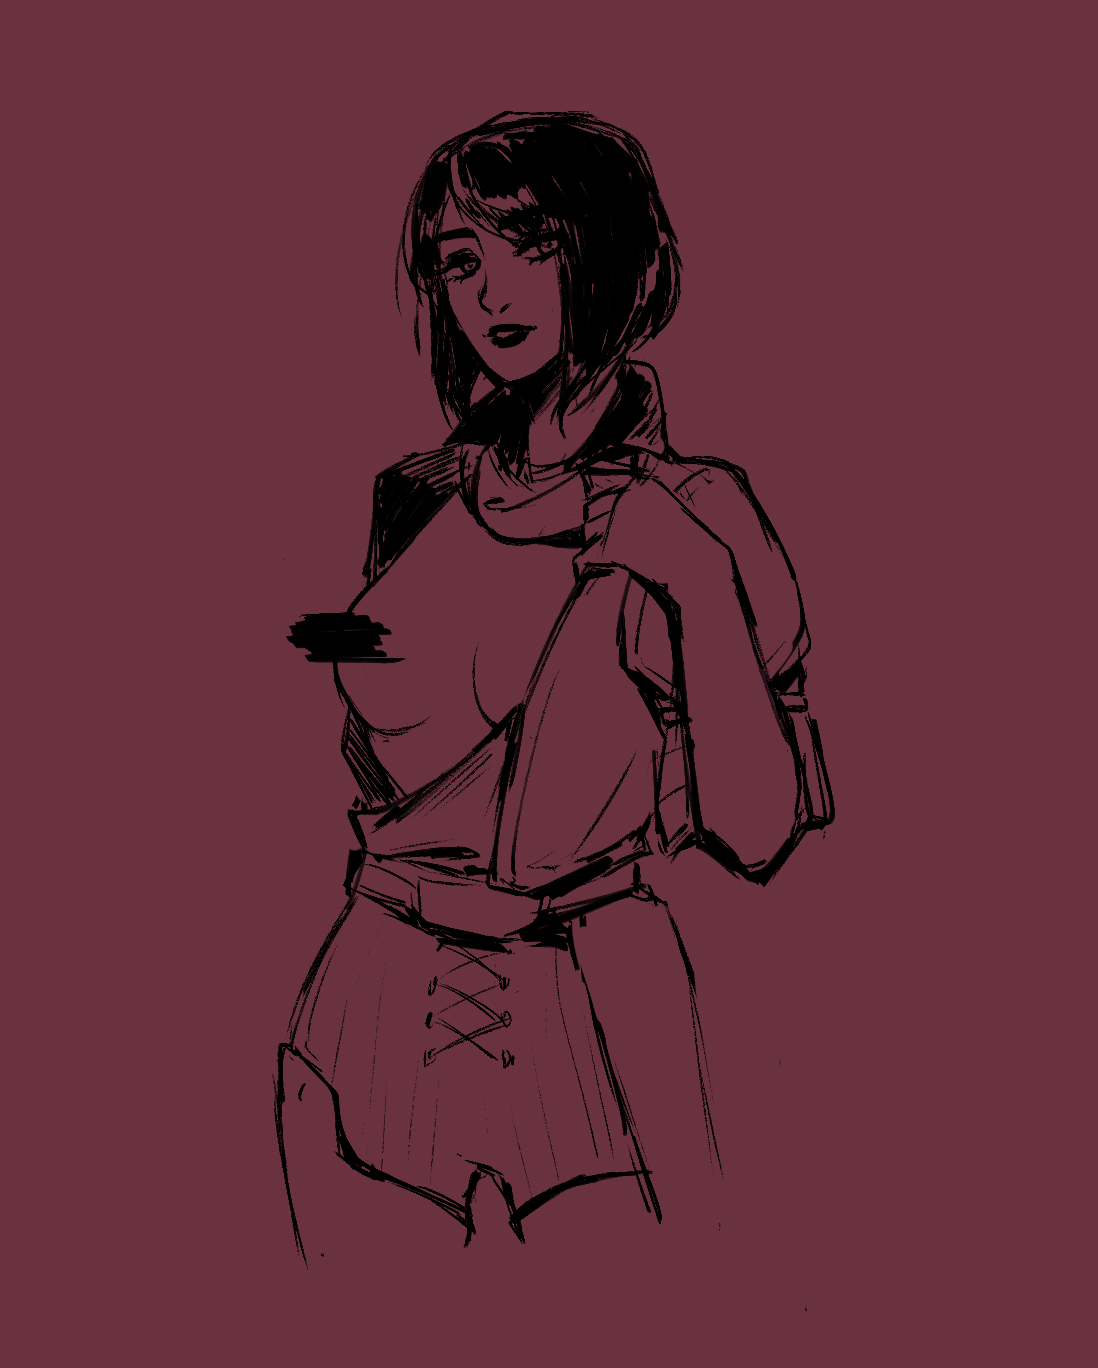 Sketch of a woman holding open her shirt. Her chest is censored with a scribble.